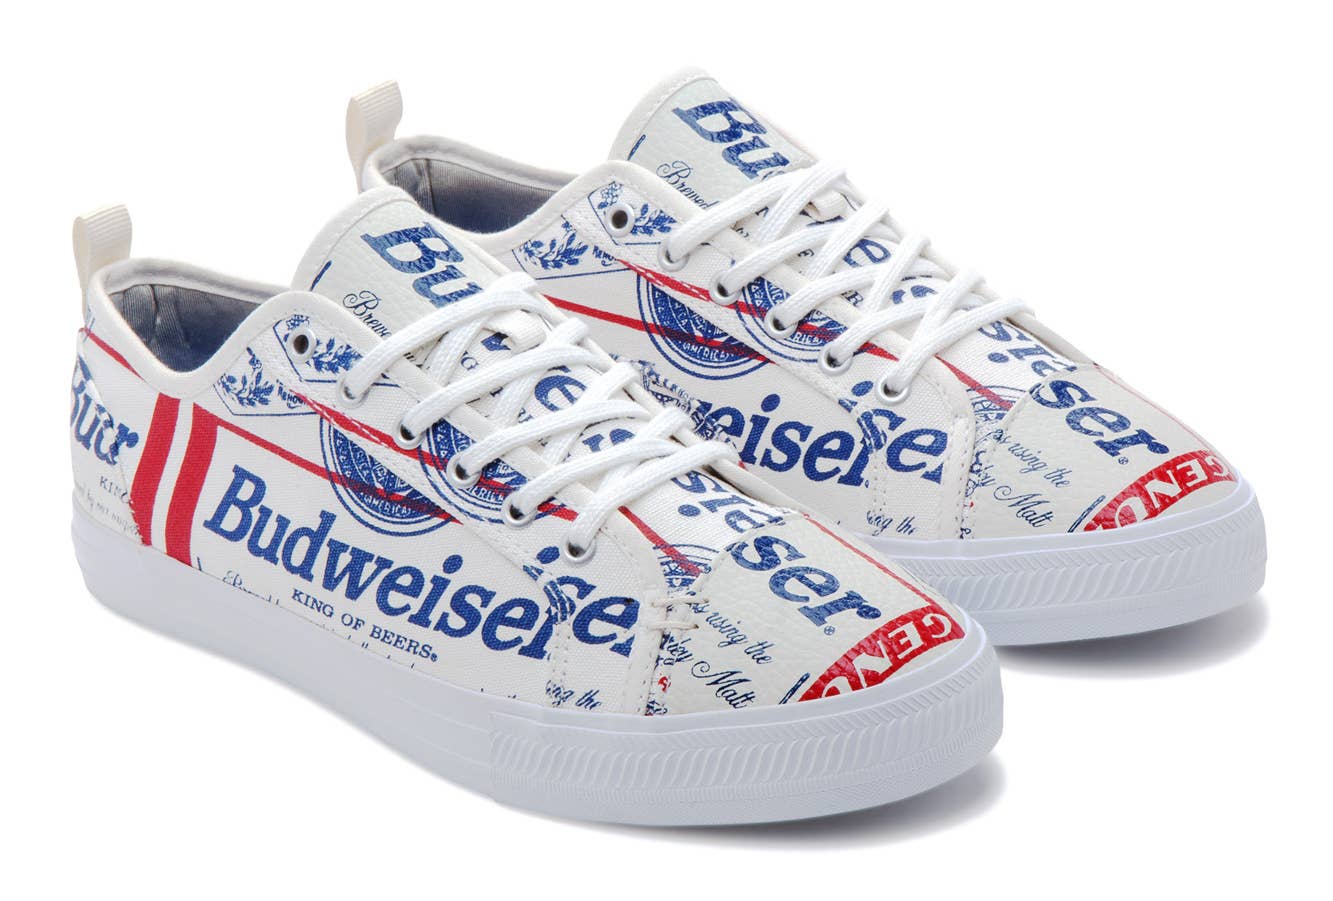 Budweiser Greats Made in America Sneakers 05